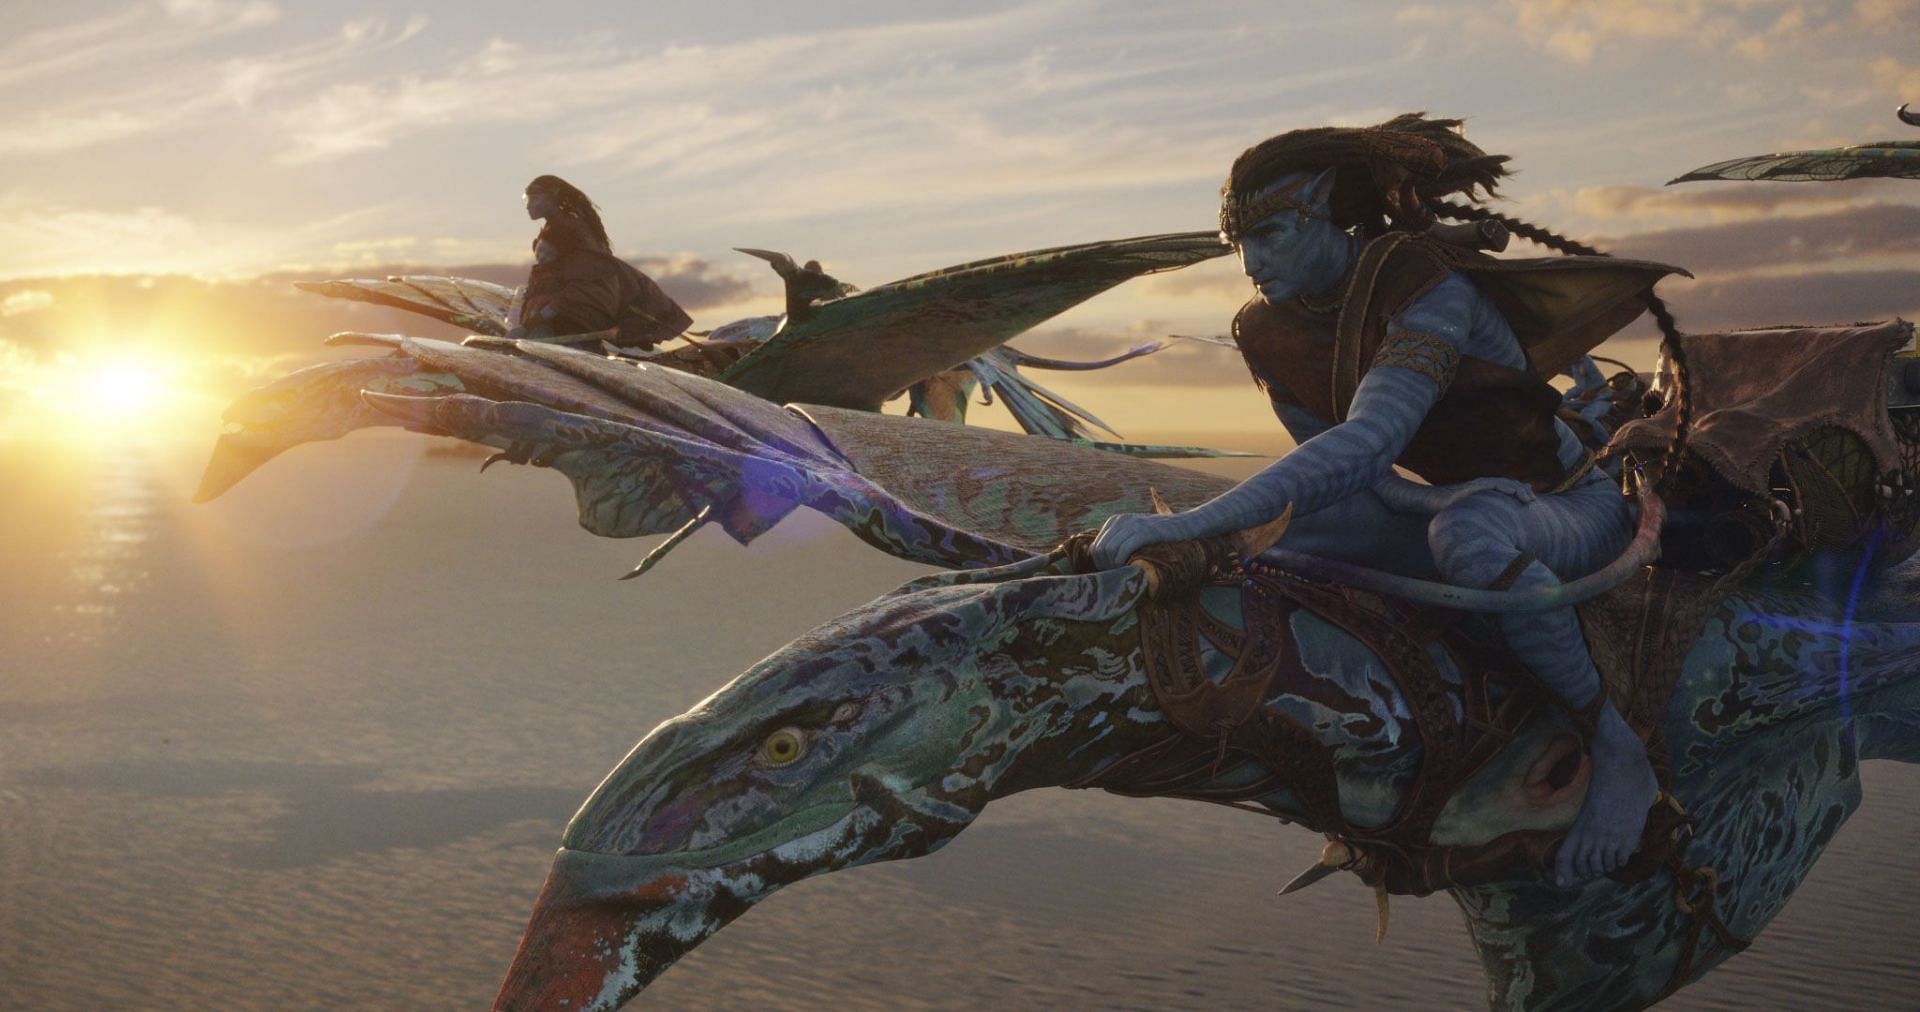 Get ready to journey to a stunning new world with Avatar 4, as we reveal everything we know so far about James Cameron